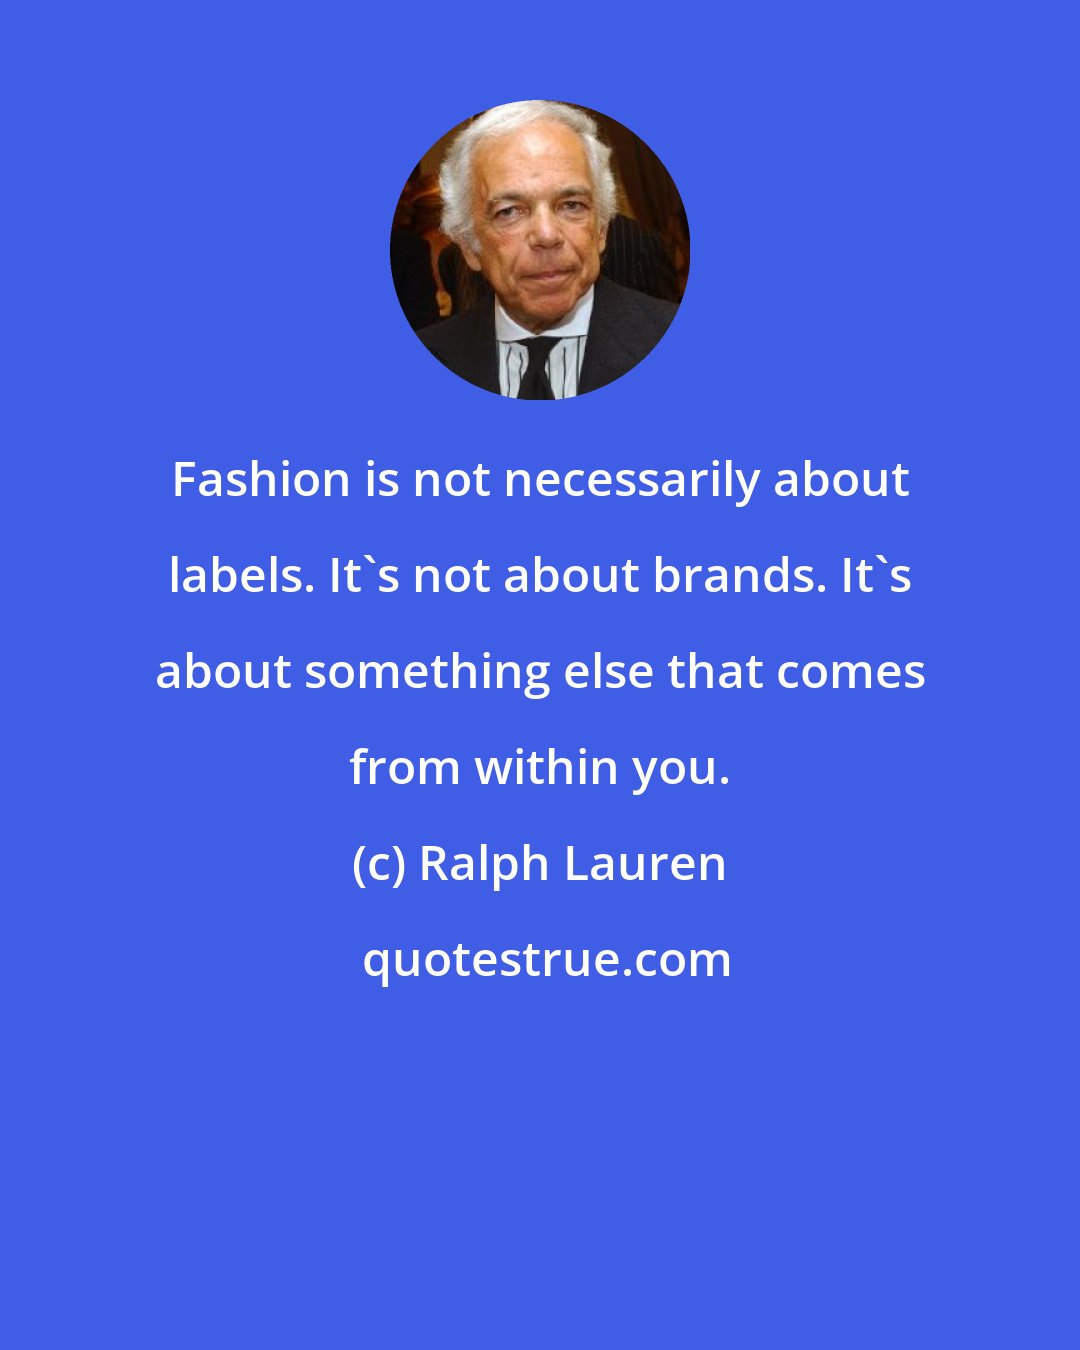 Ralph Lauren: Fashion is not necessarily about labels. It's not about brands. It's about something else that comes from within you.